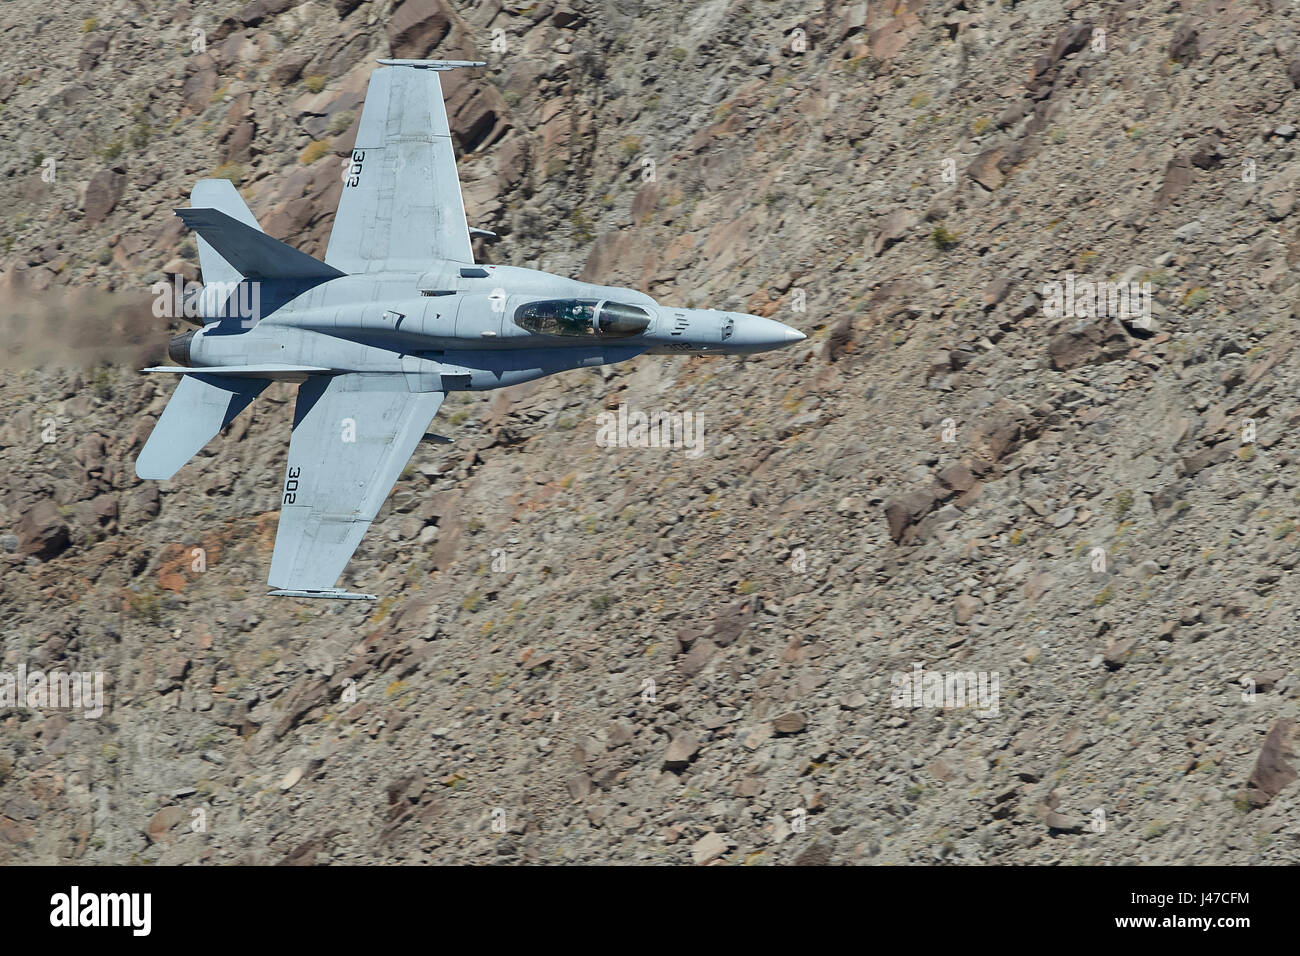 United States Navy F/A-18C, Hornet, Flying At High Speed And Low Level. Through A Desert Canyon. Stock Photo